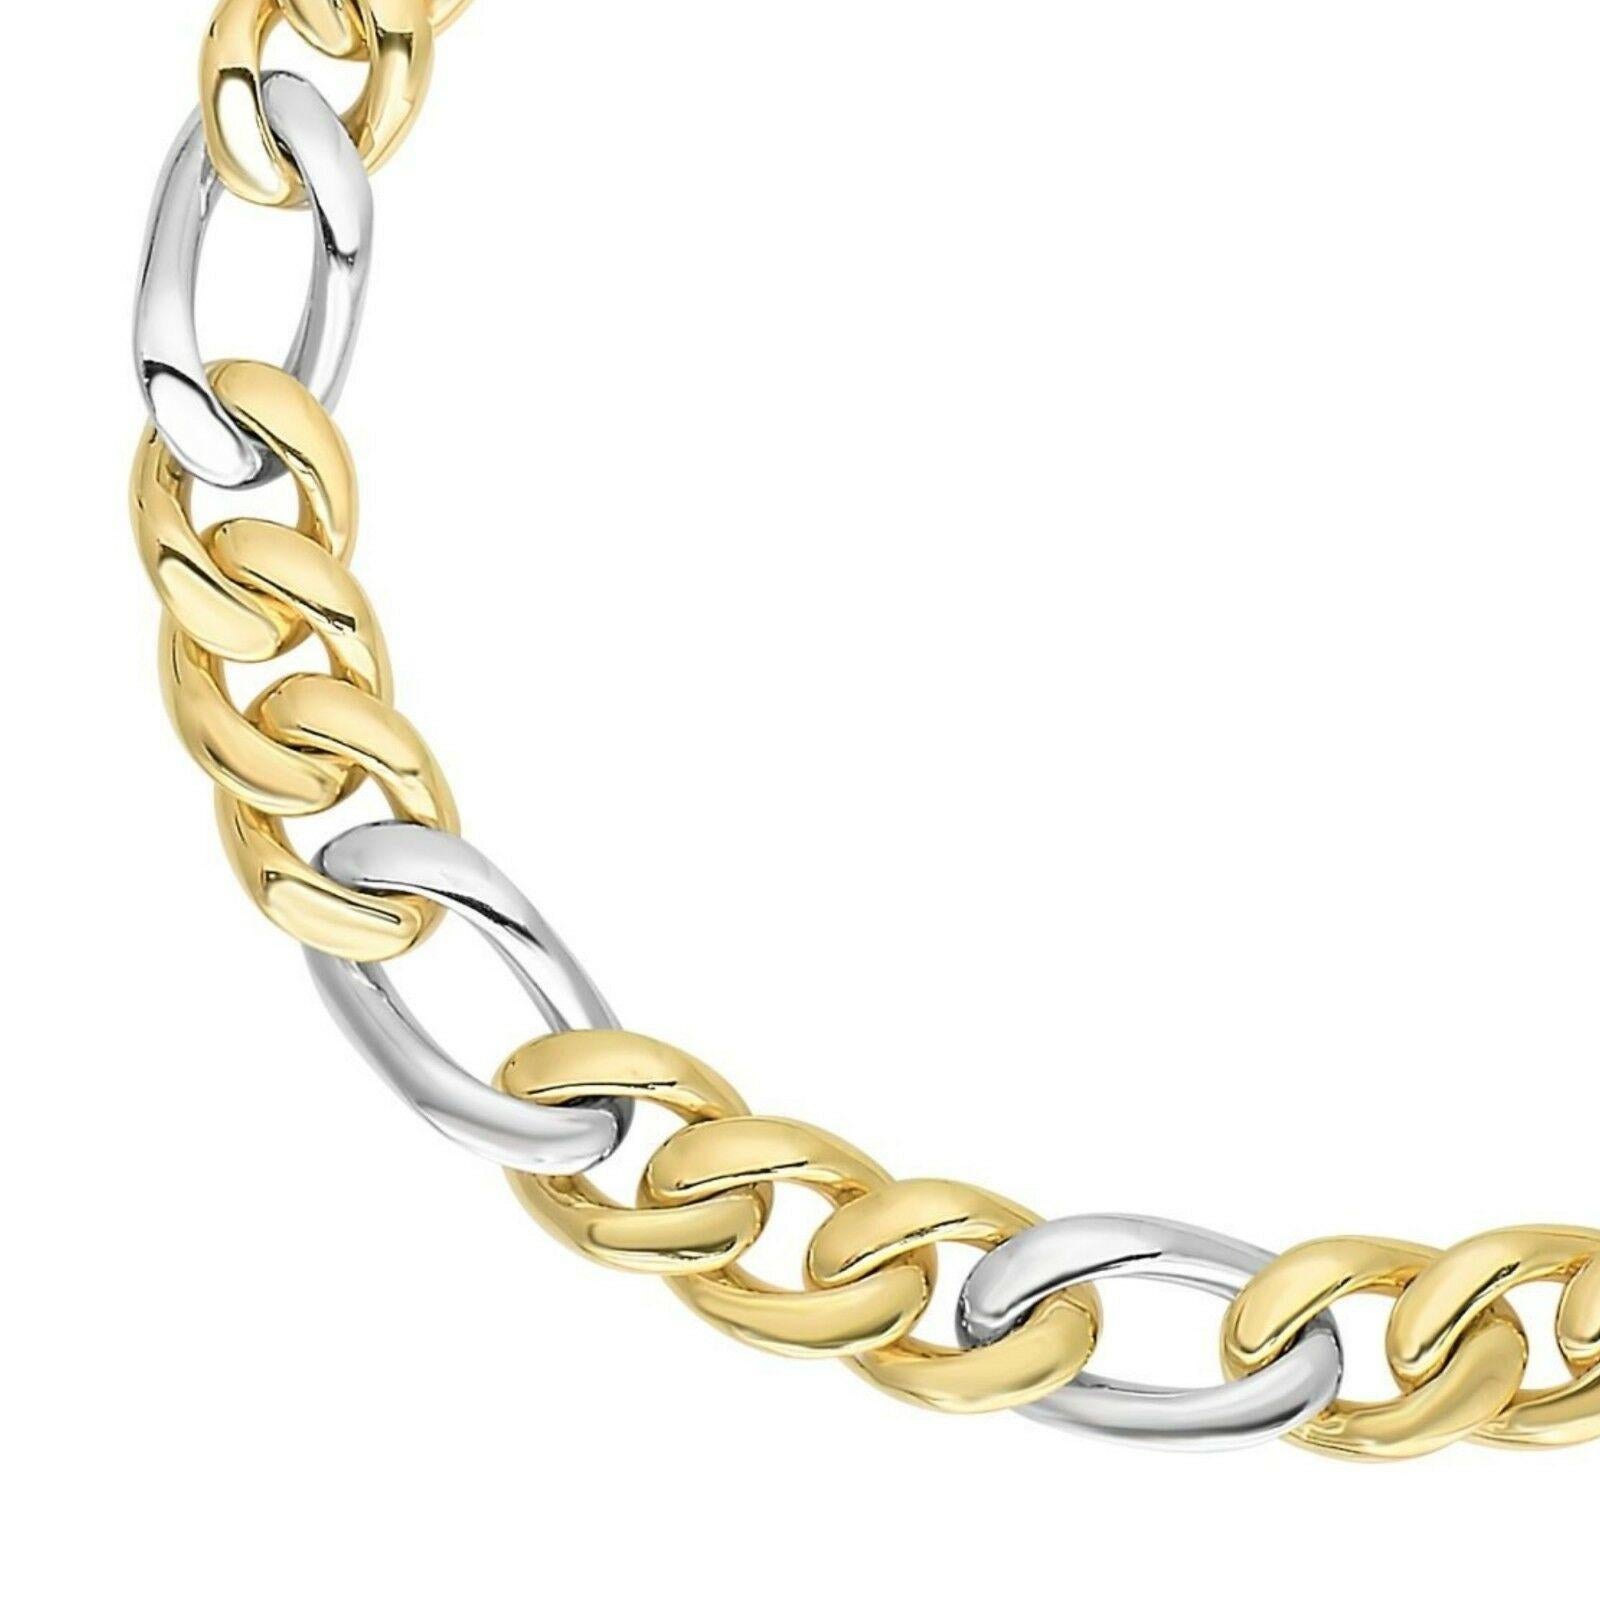 Women's 14 Karat Two-Toned Gold Soft Faceted Figaro Style Bracelet For Sale